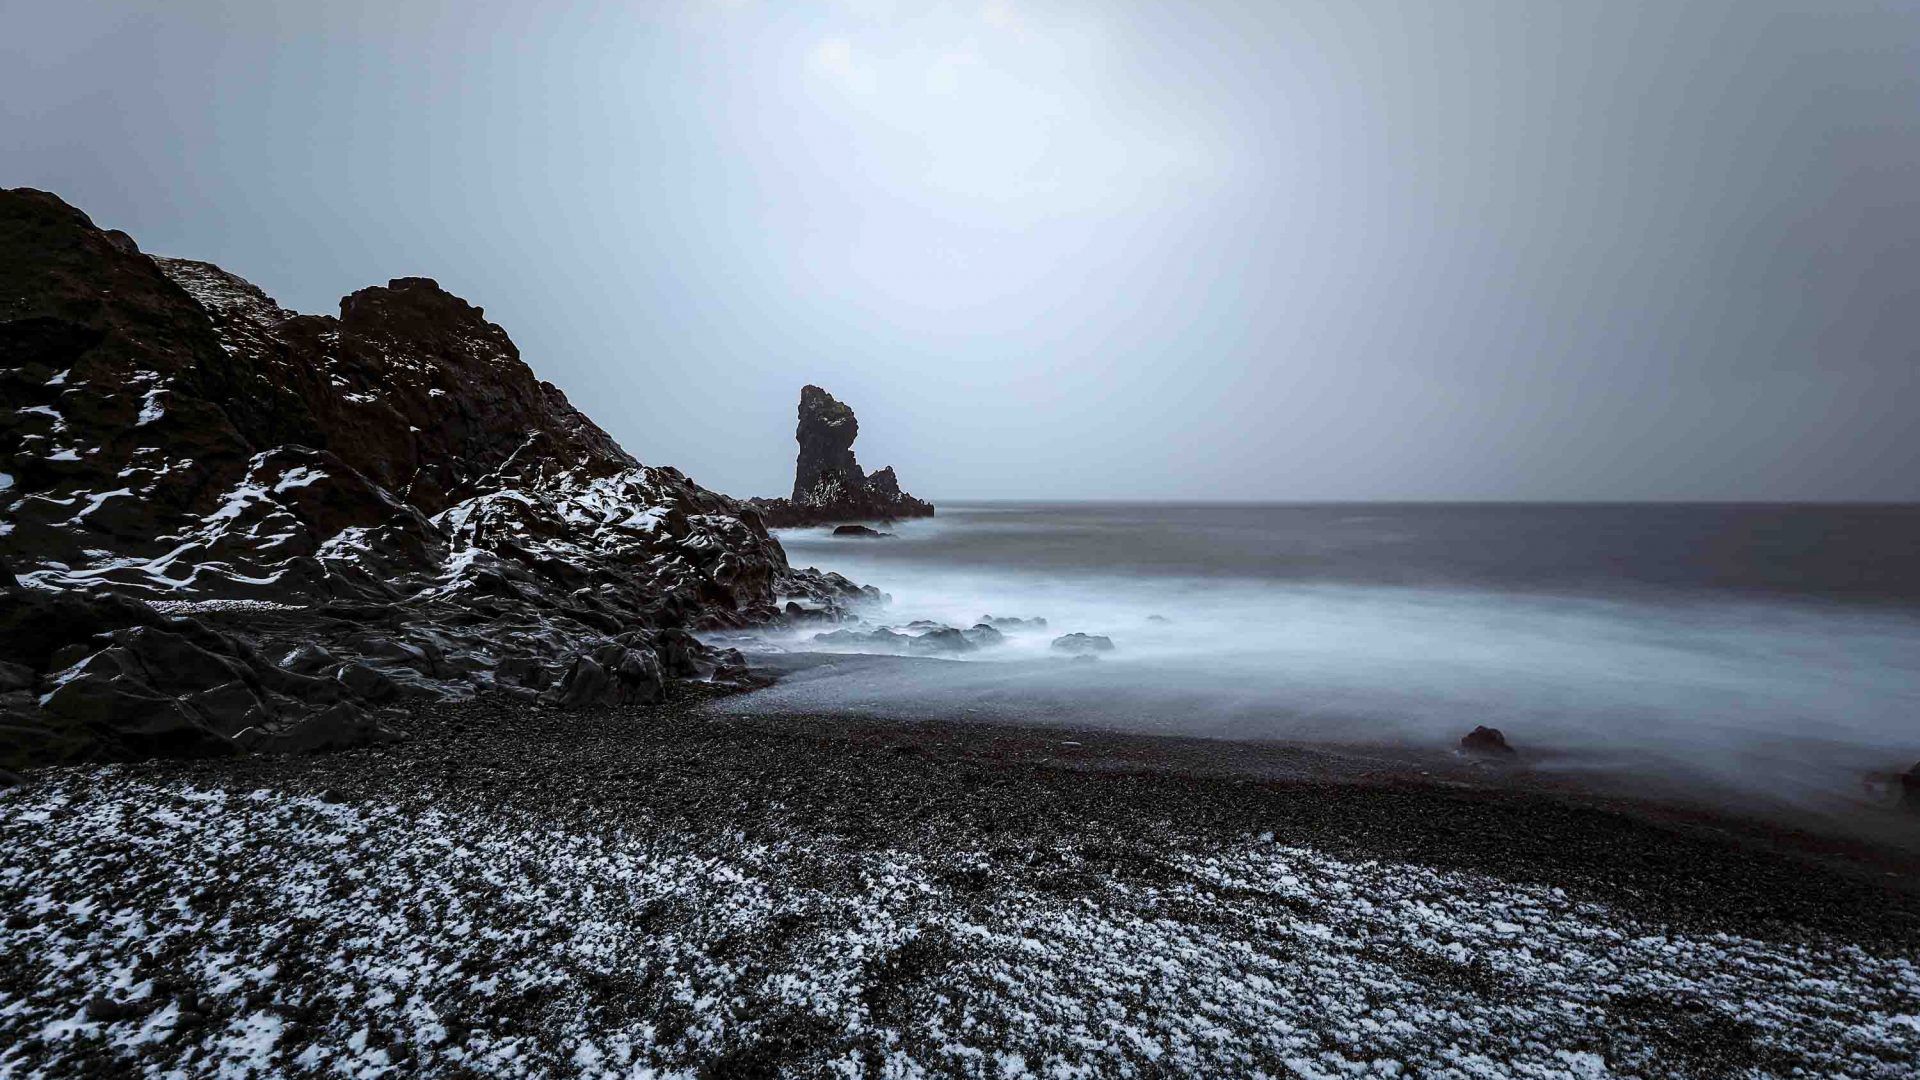 A moody scene of dark sky, cliffs and waters edge.